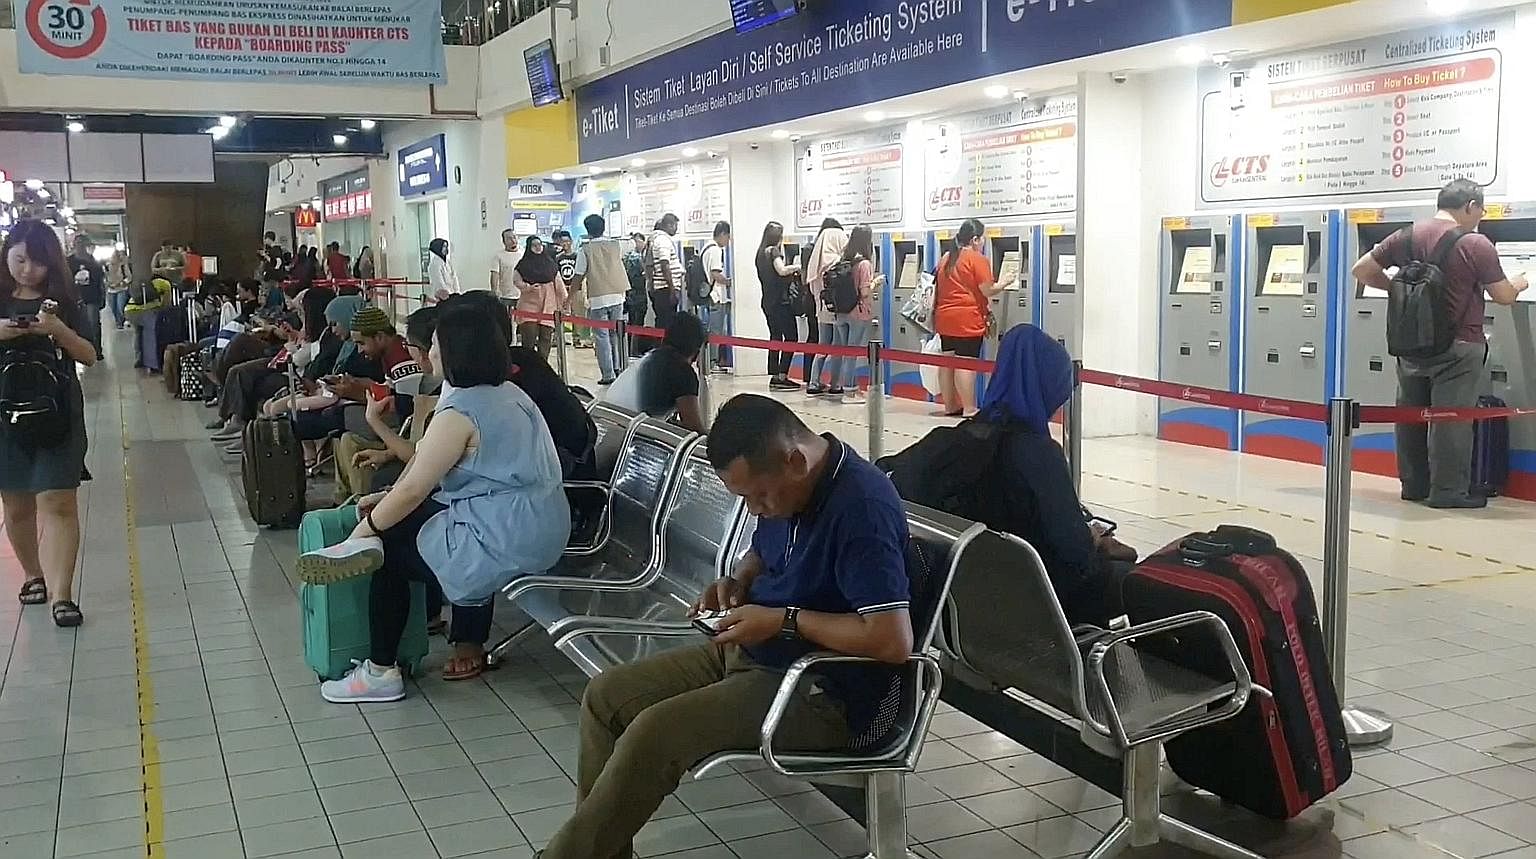 Commuters waiting inside the Larkin bus terminal. Malaysia's Iskandar Regional Development Authority is preparing to roll out a Bus Rapid Transit system to beat congestion and encourage more people to use public transport. ST PHOTO: ARLINA ARSHAD